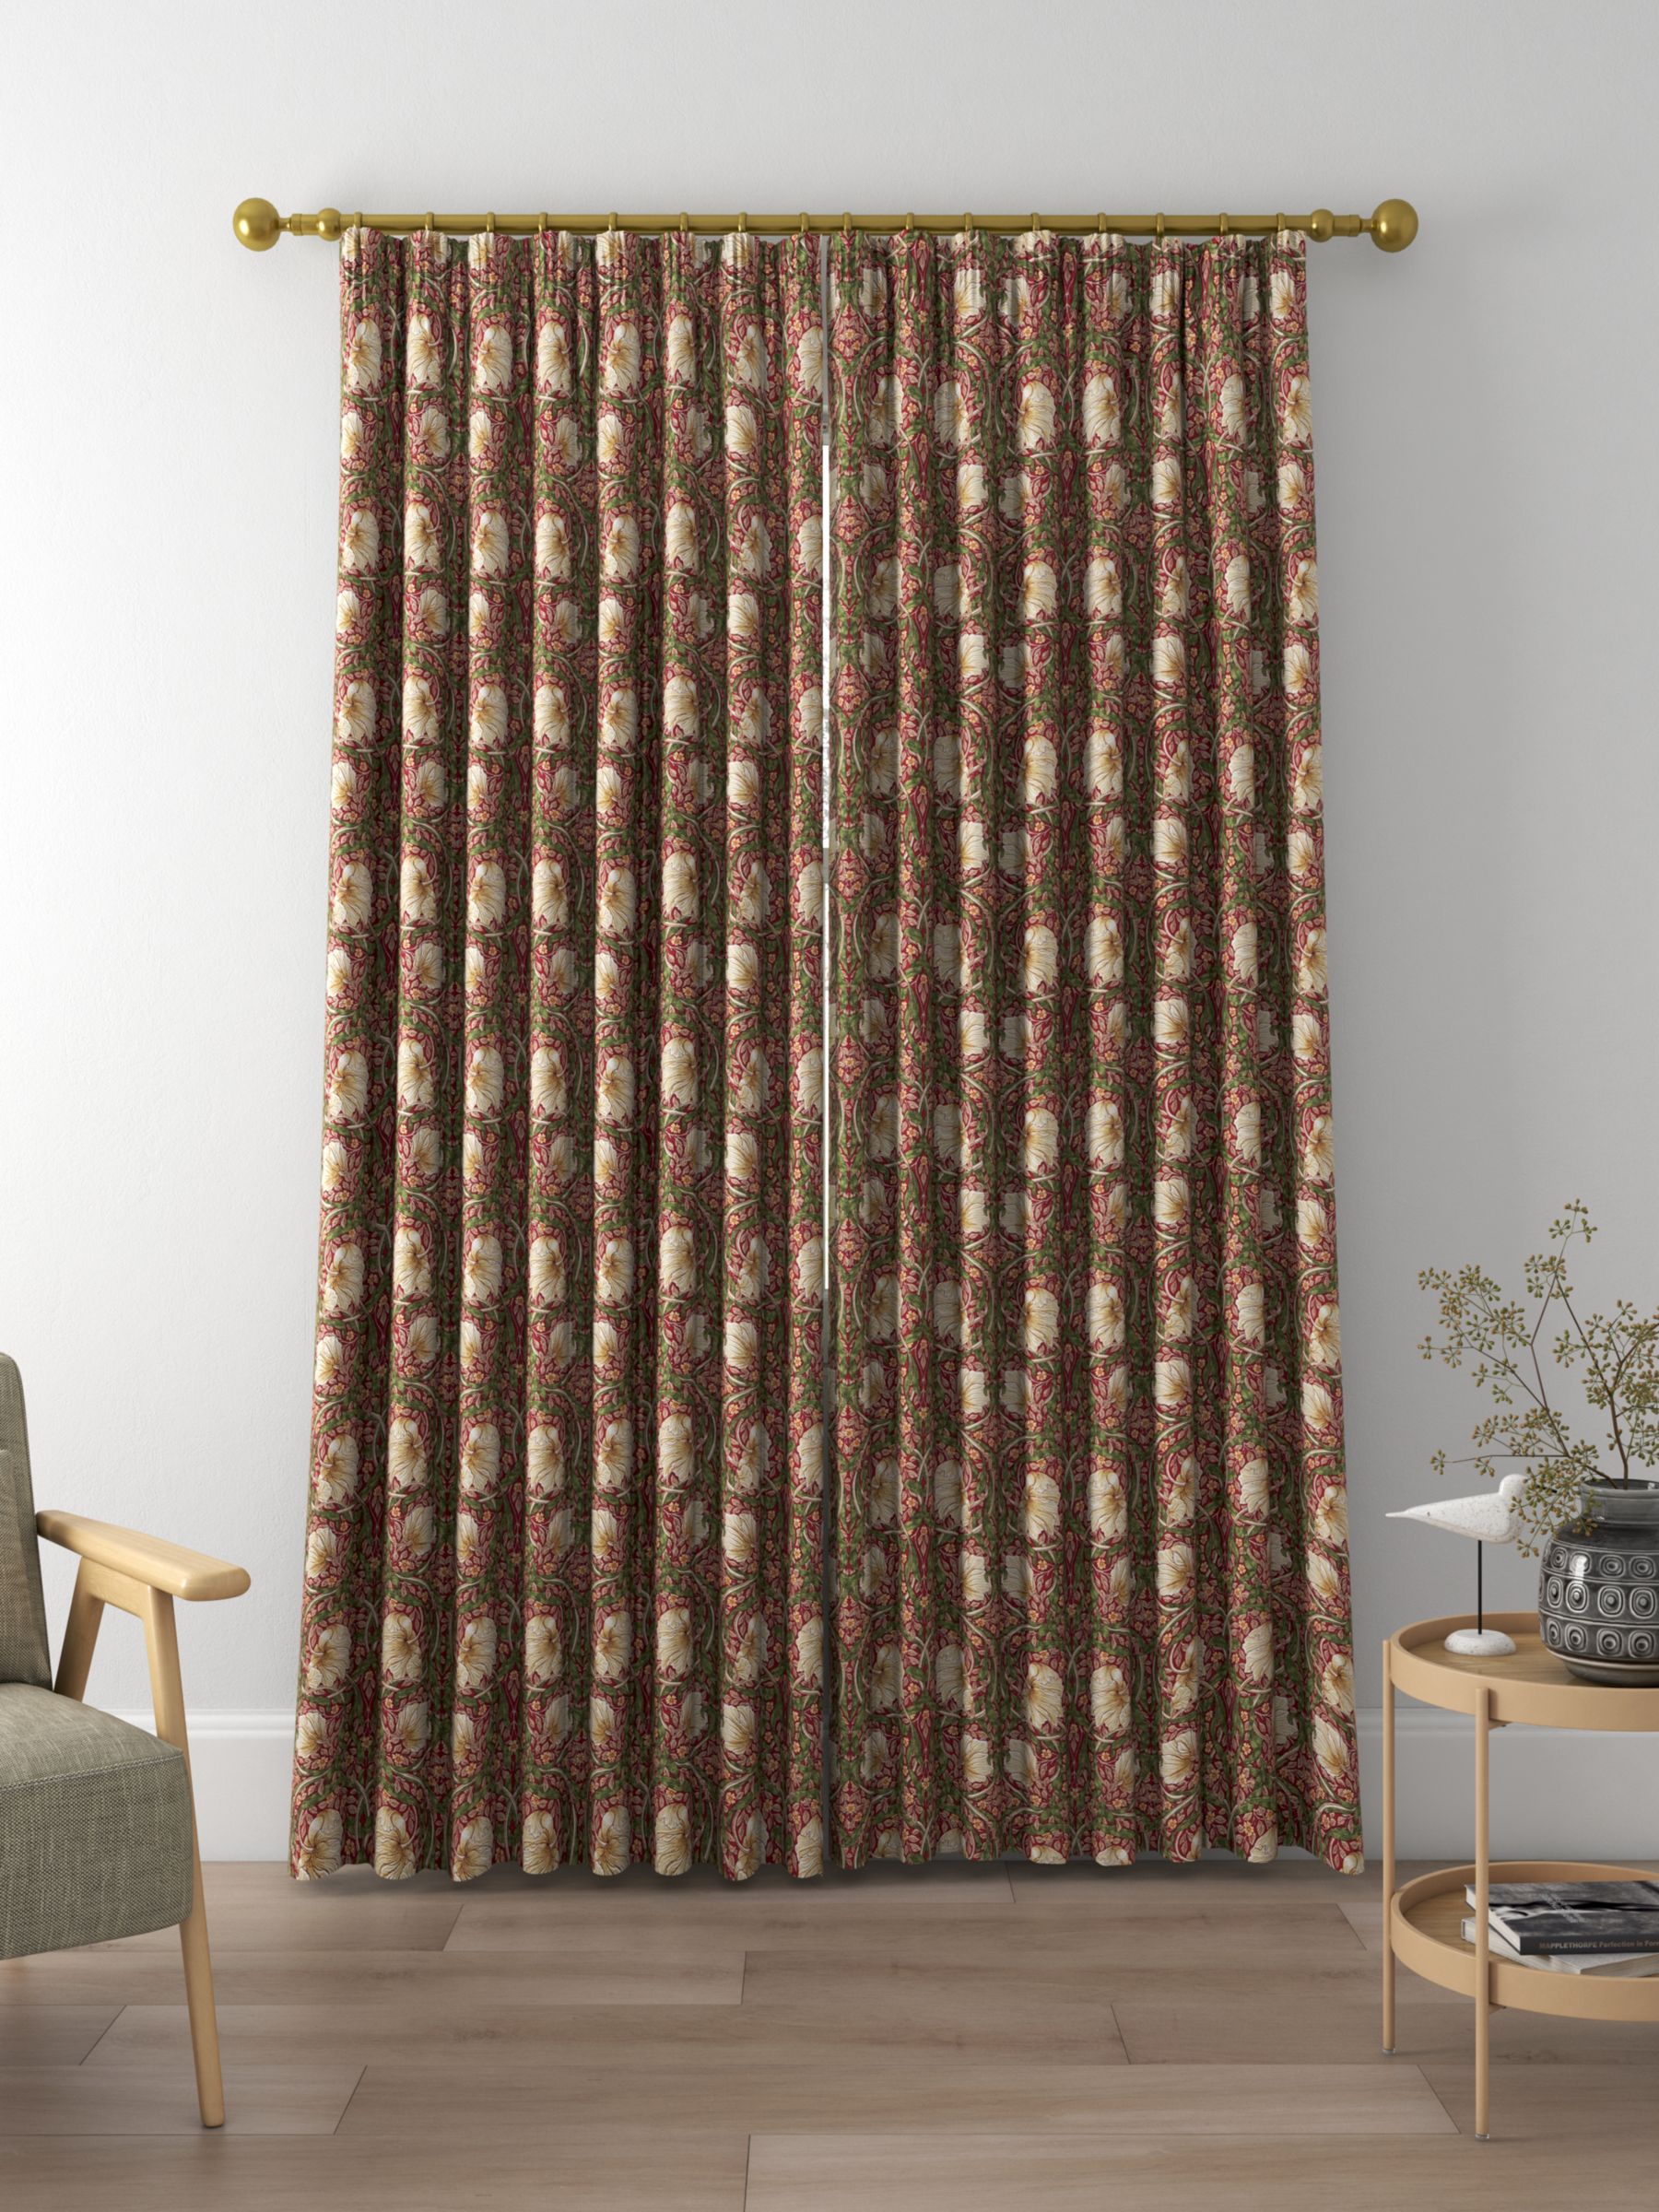 Morris & Co. Pimpernel Print Made to Measure Curtains, Red/Thyme